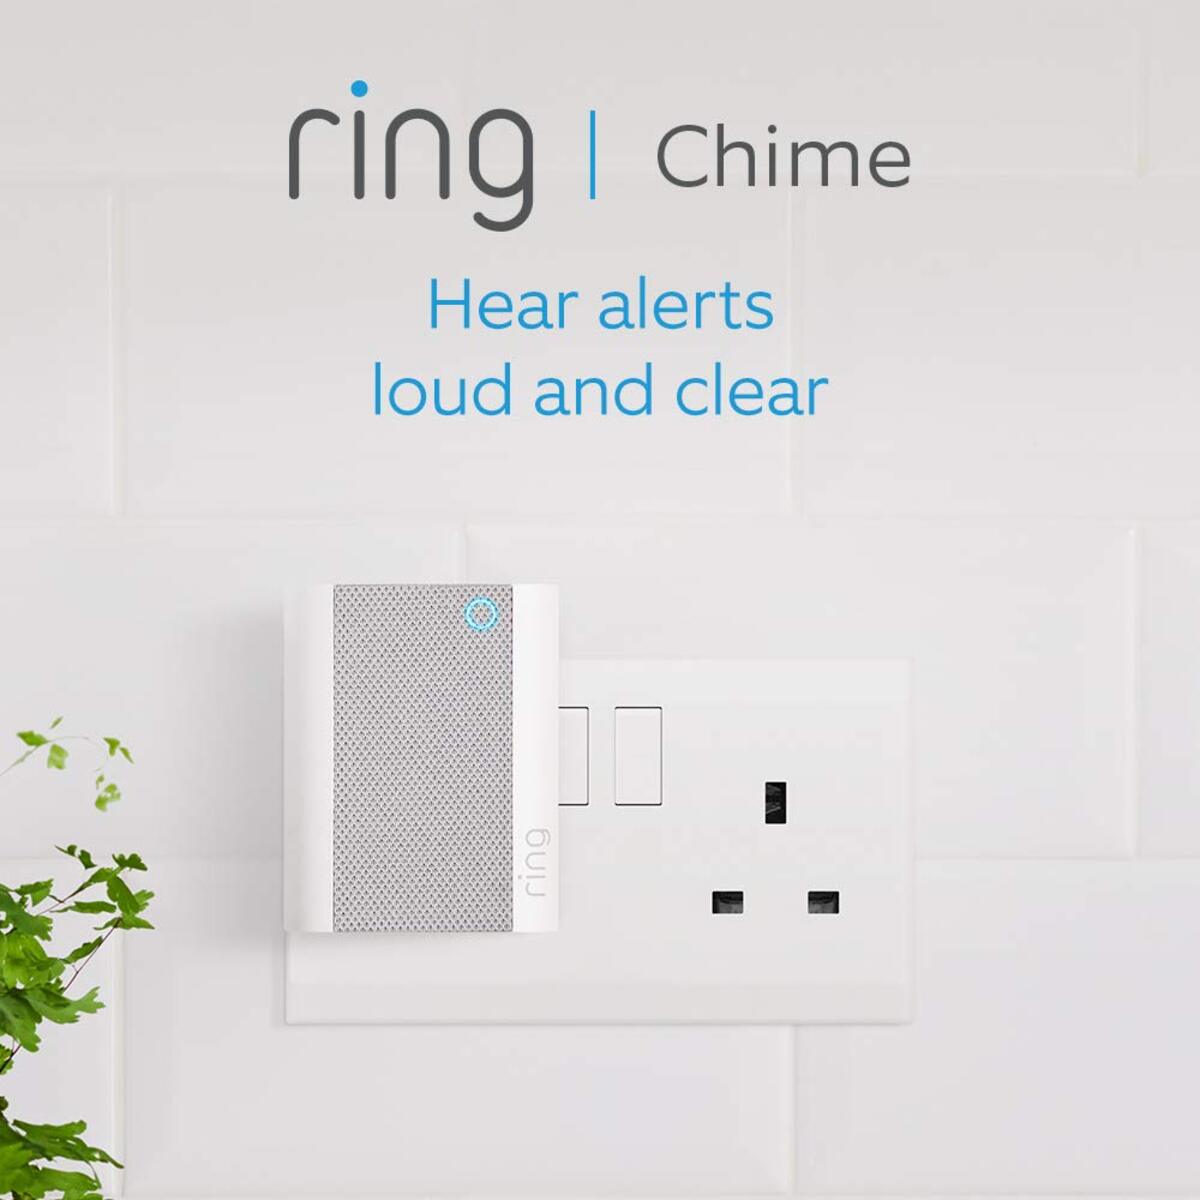 RING - Chime (New)